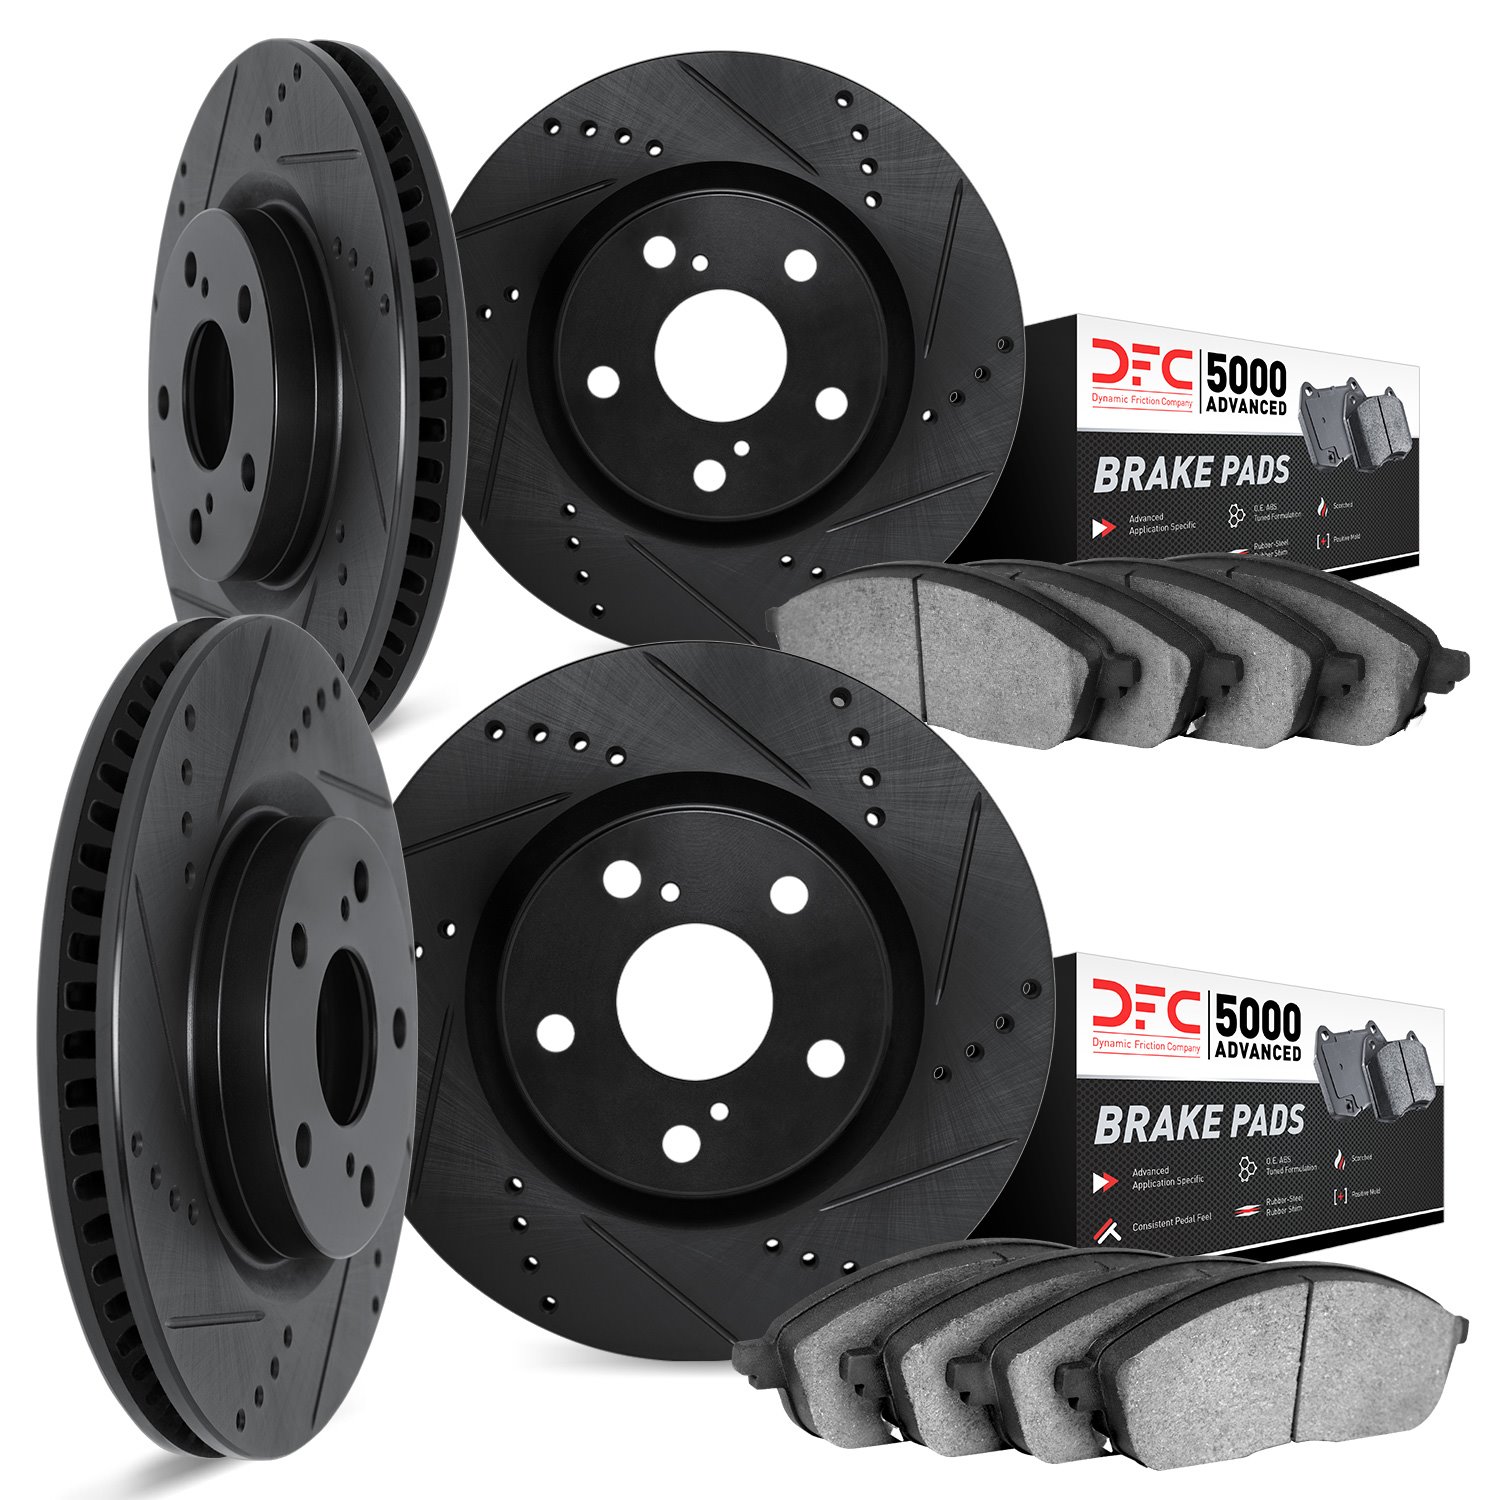 8504-46036 Drilled/Slotted Brake Rotors w/5000 Advanced Brake Pads Kit [Black], 2016-2019 GM, Position: Front and Rear